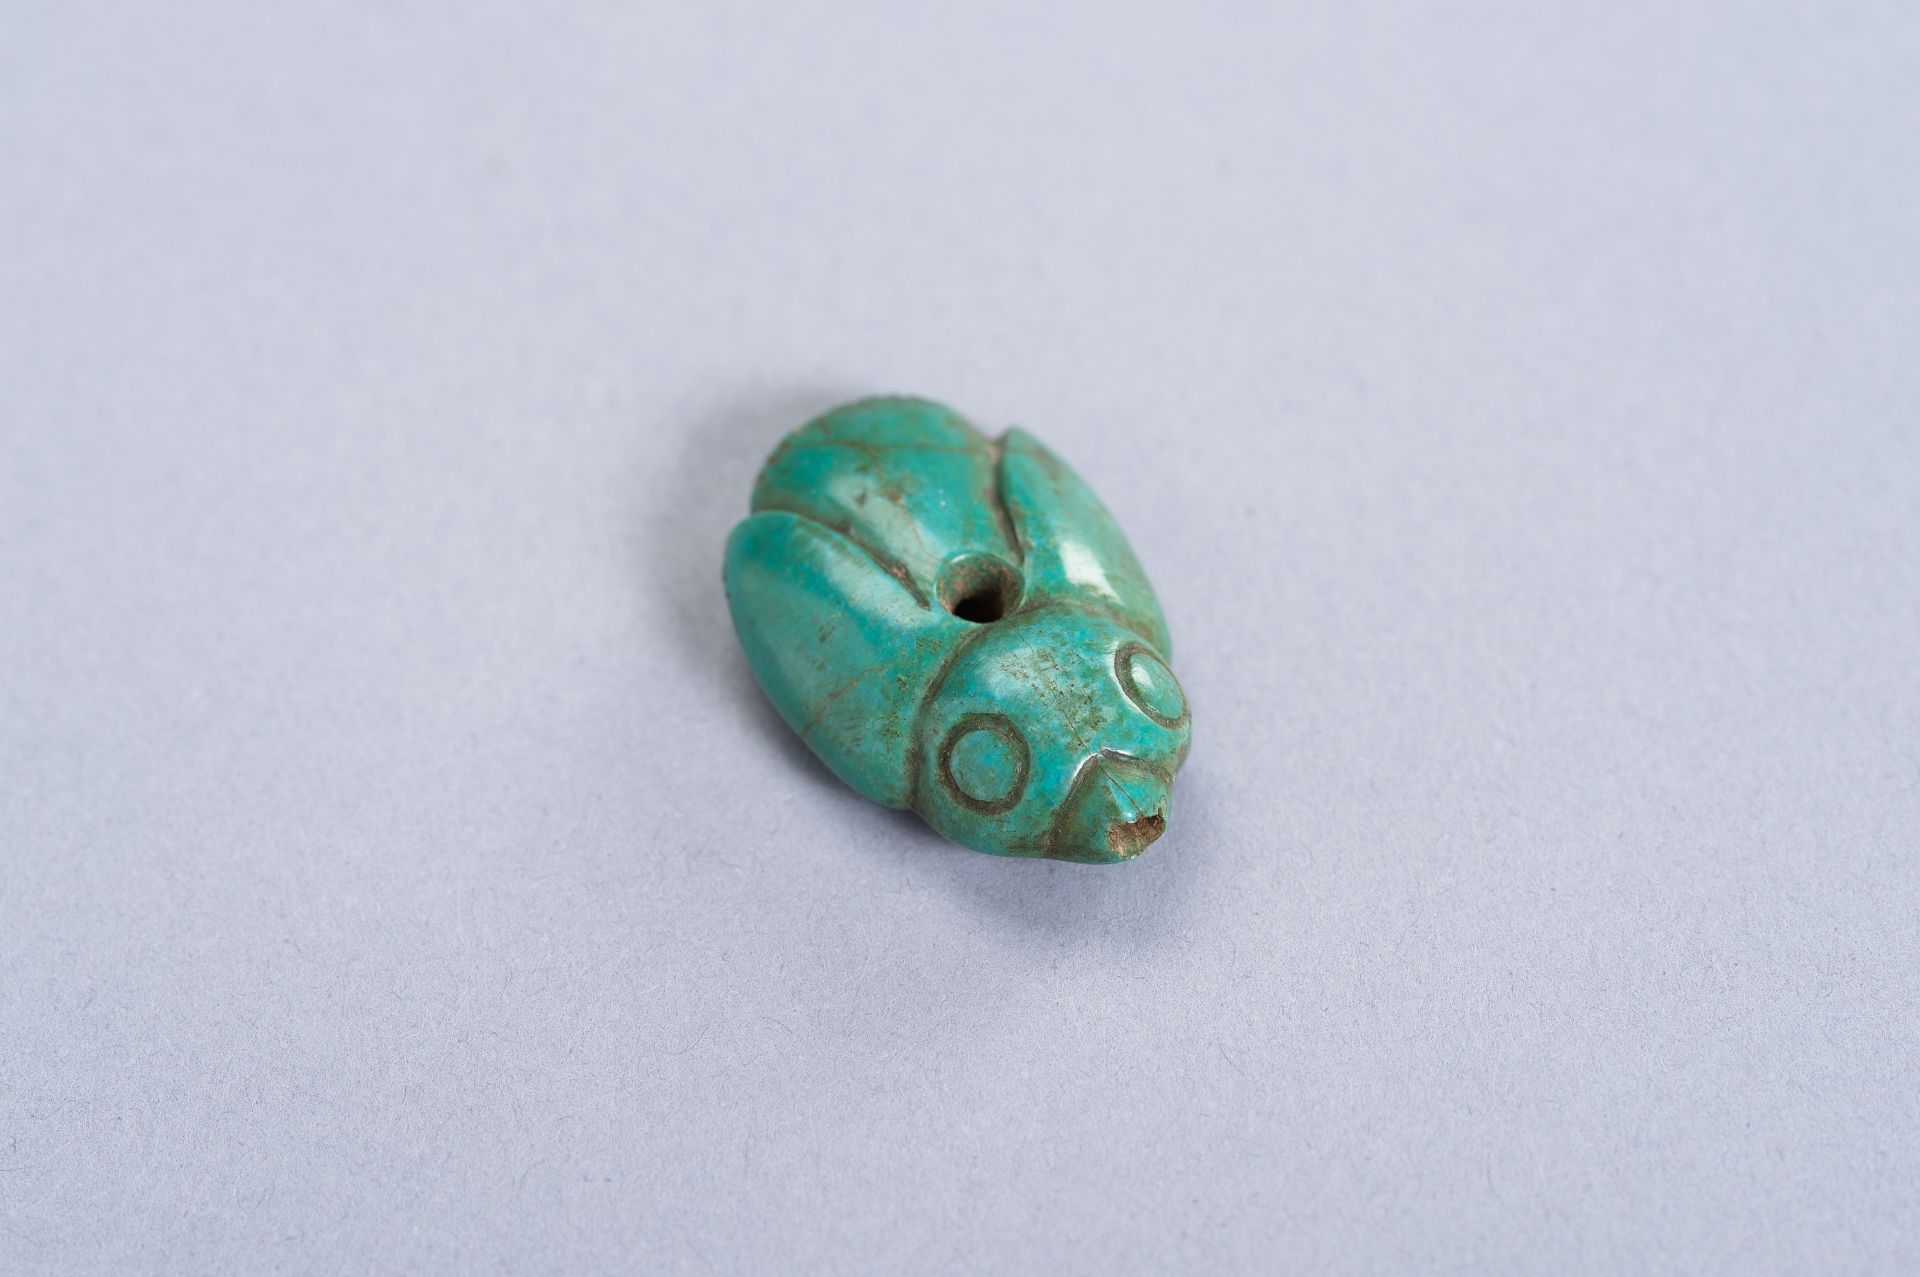 A TURQUOISE PENDANT OF A BIRD - Image 3 of 7